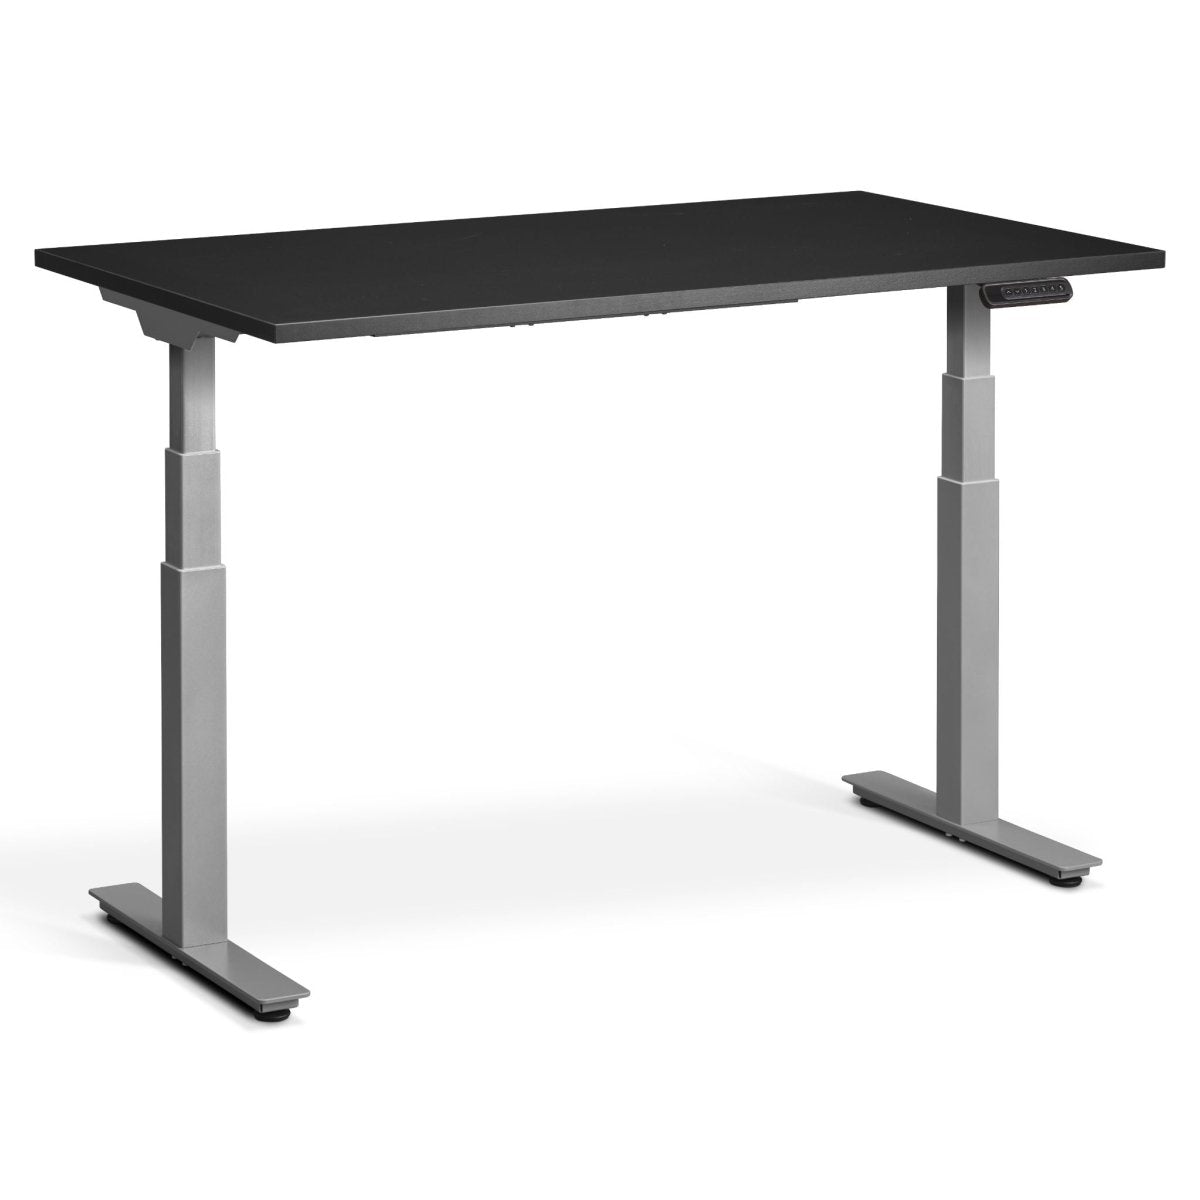 dual moor standing desk - the Rise2 in Black with Silver Frame